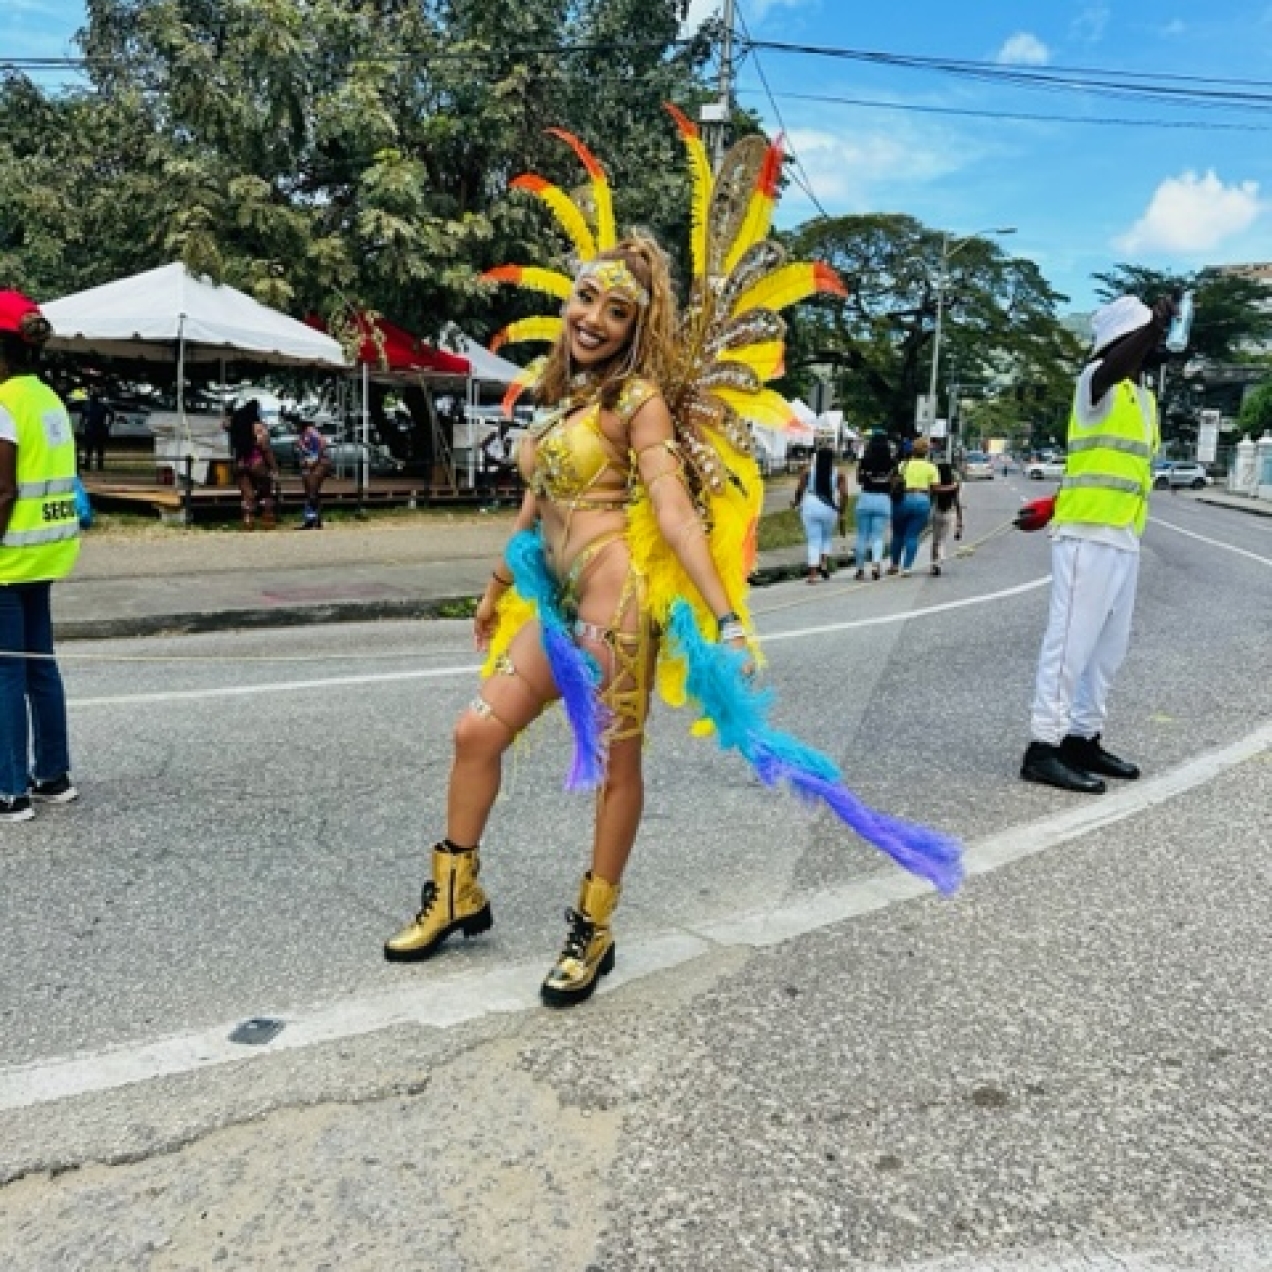 5 Things to avoid when planning a trip to Trinidad Carnival